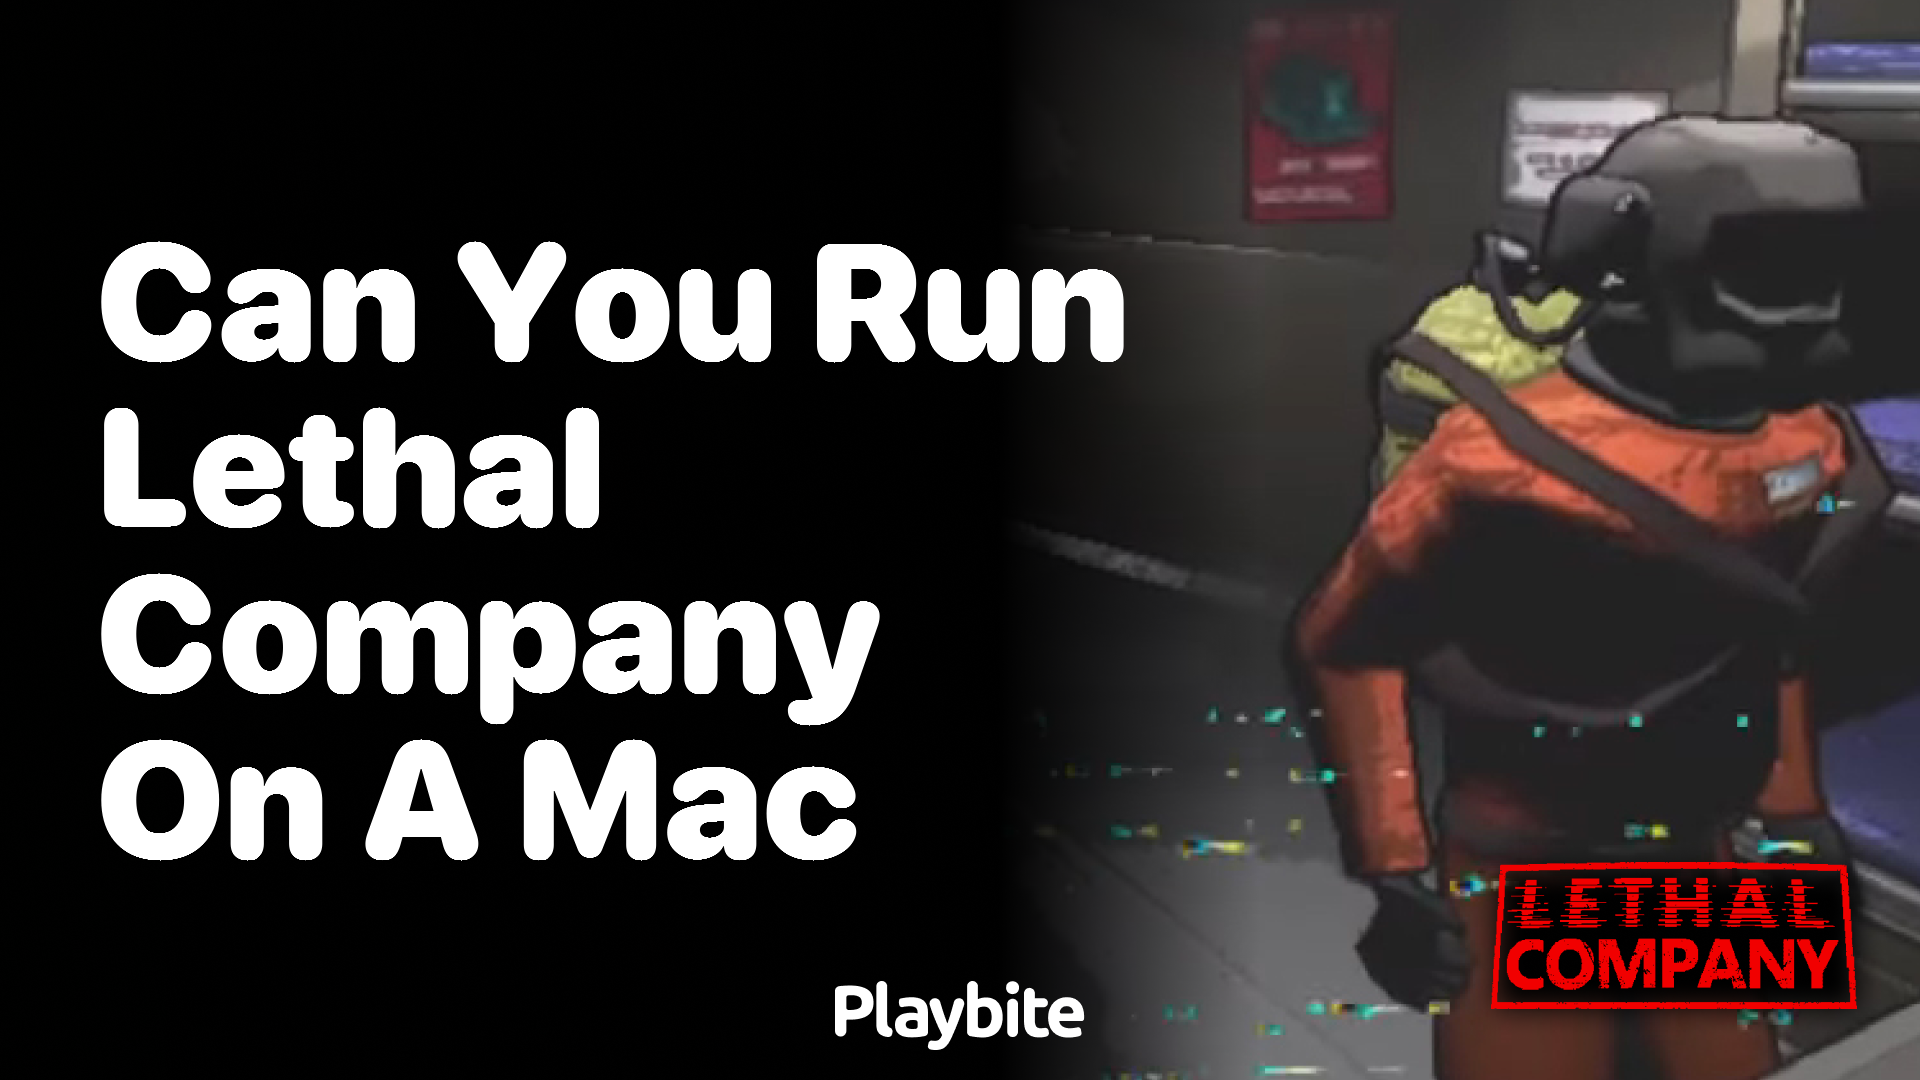 Can You Run Lethal Company on a Mac?